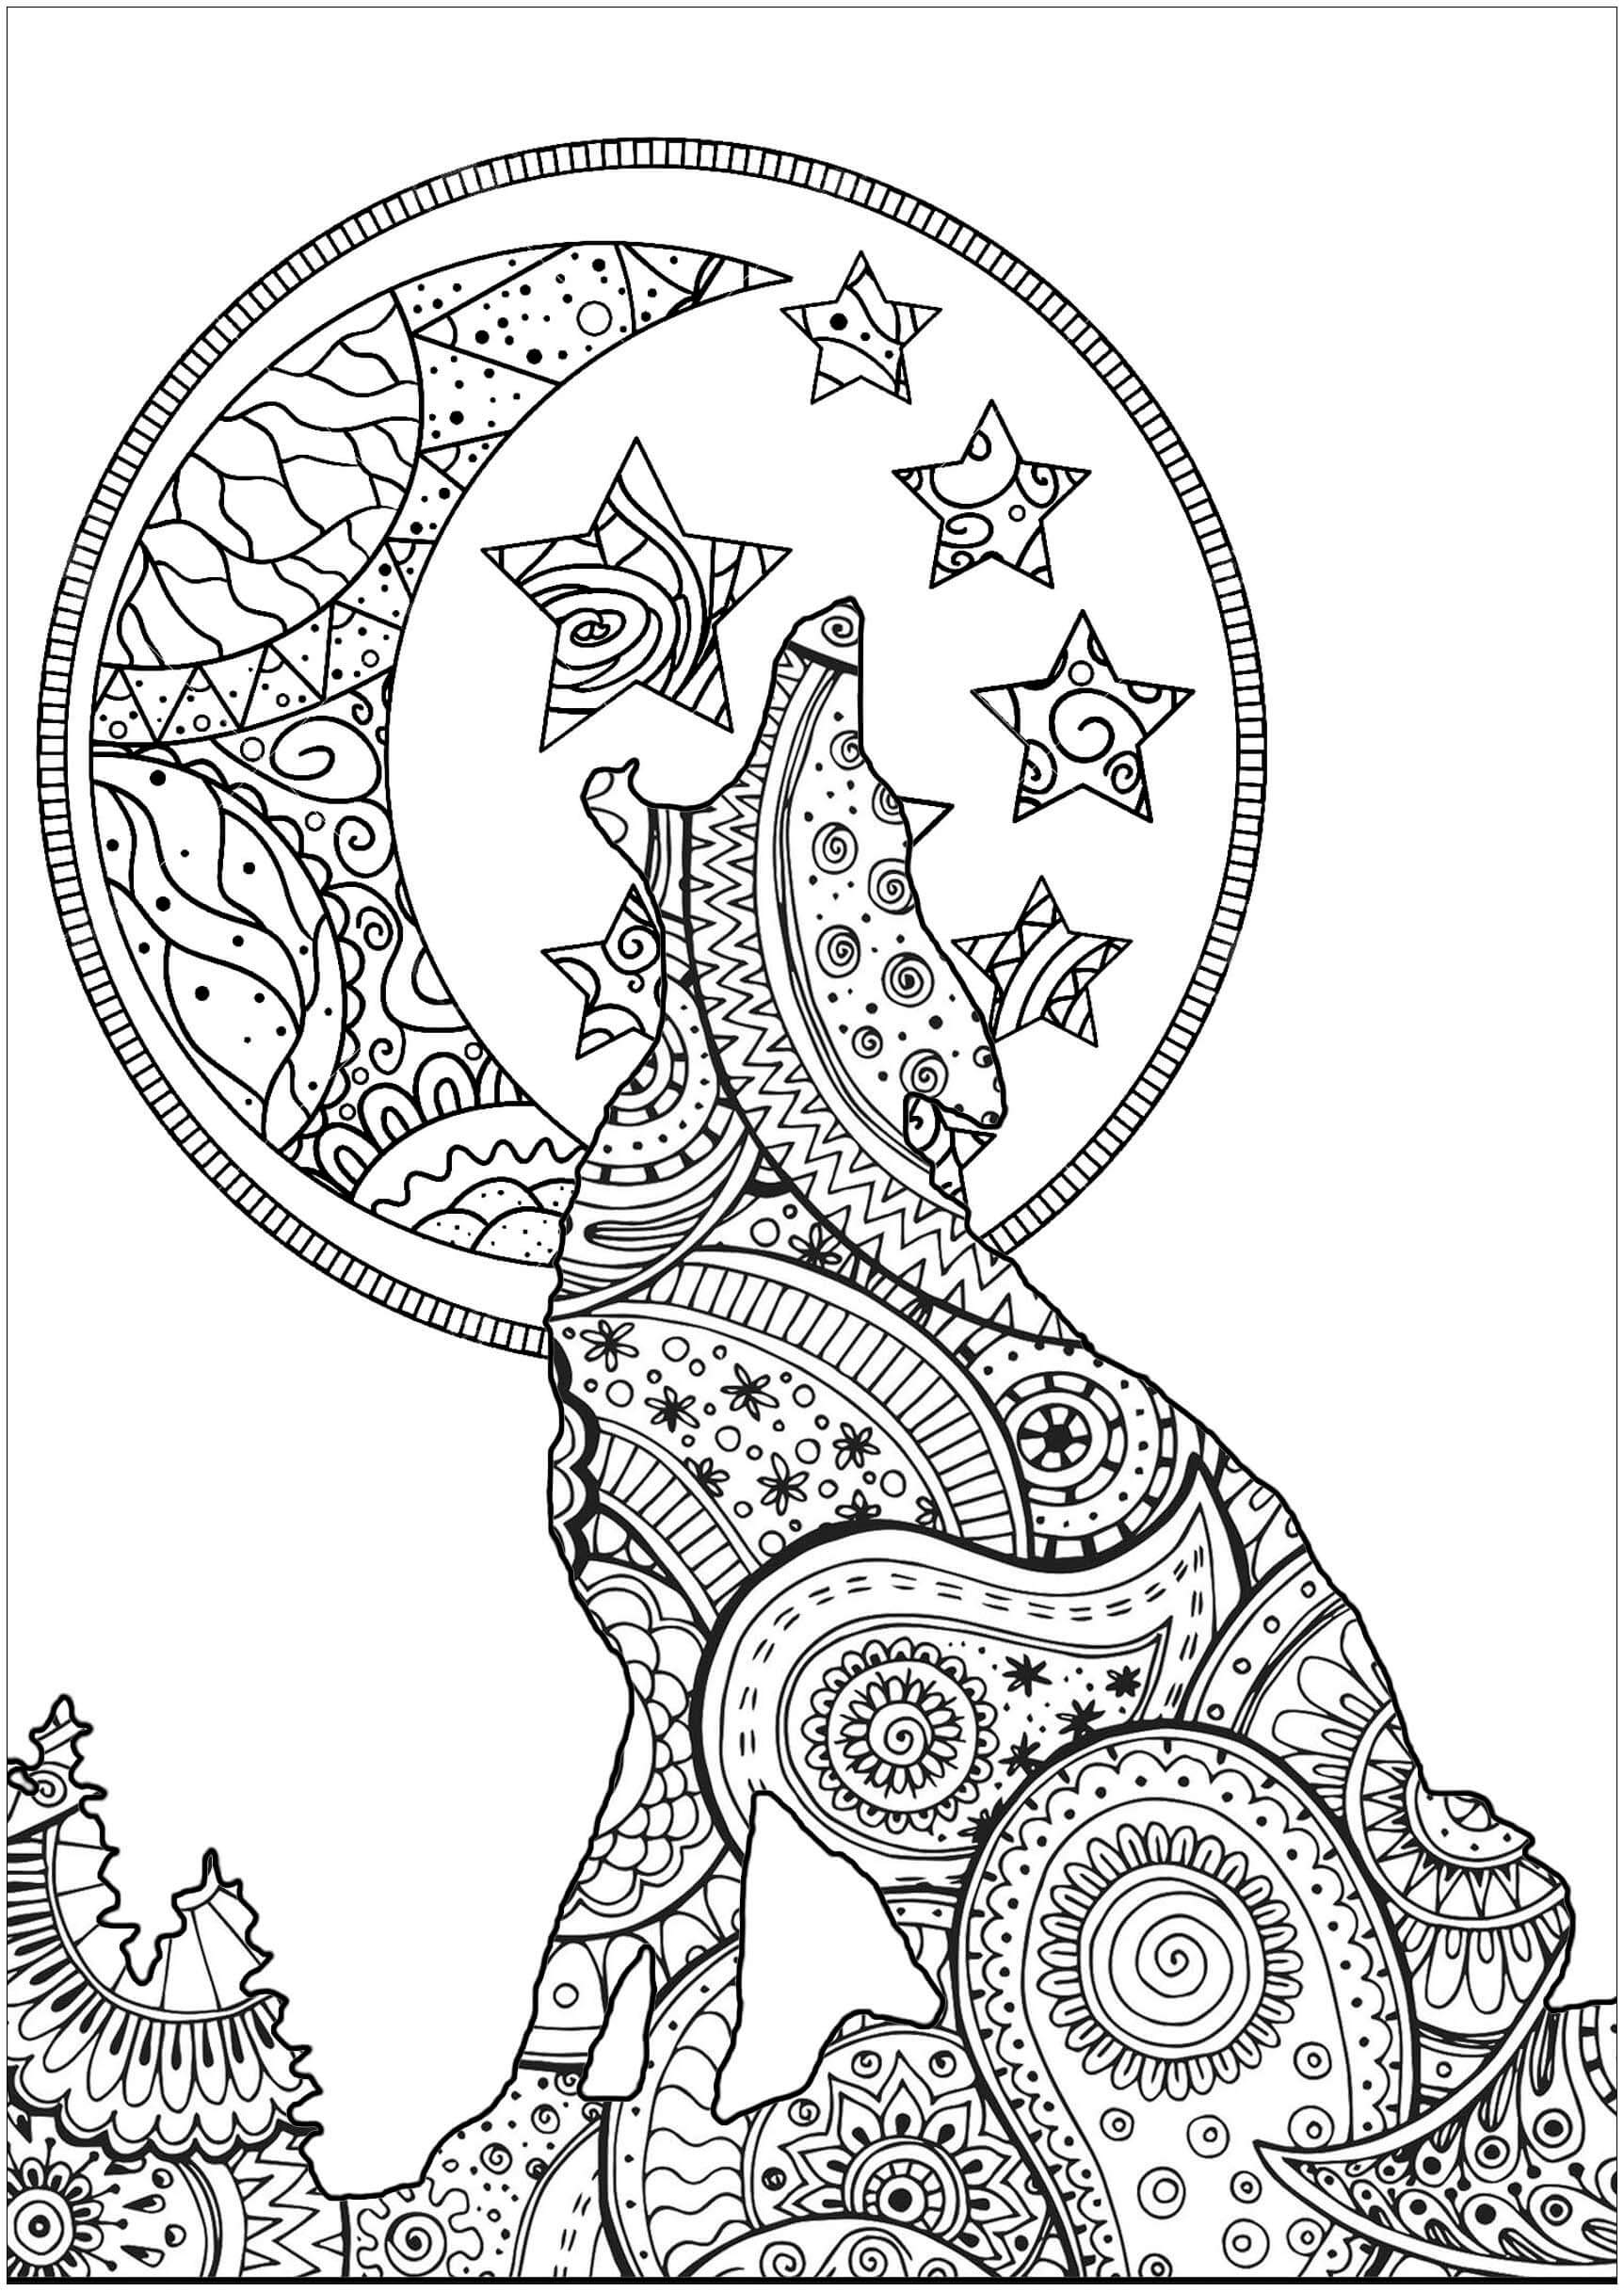 gray wolf coloring page | wolf coloring pages | wolf mandala coloring page